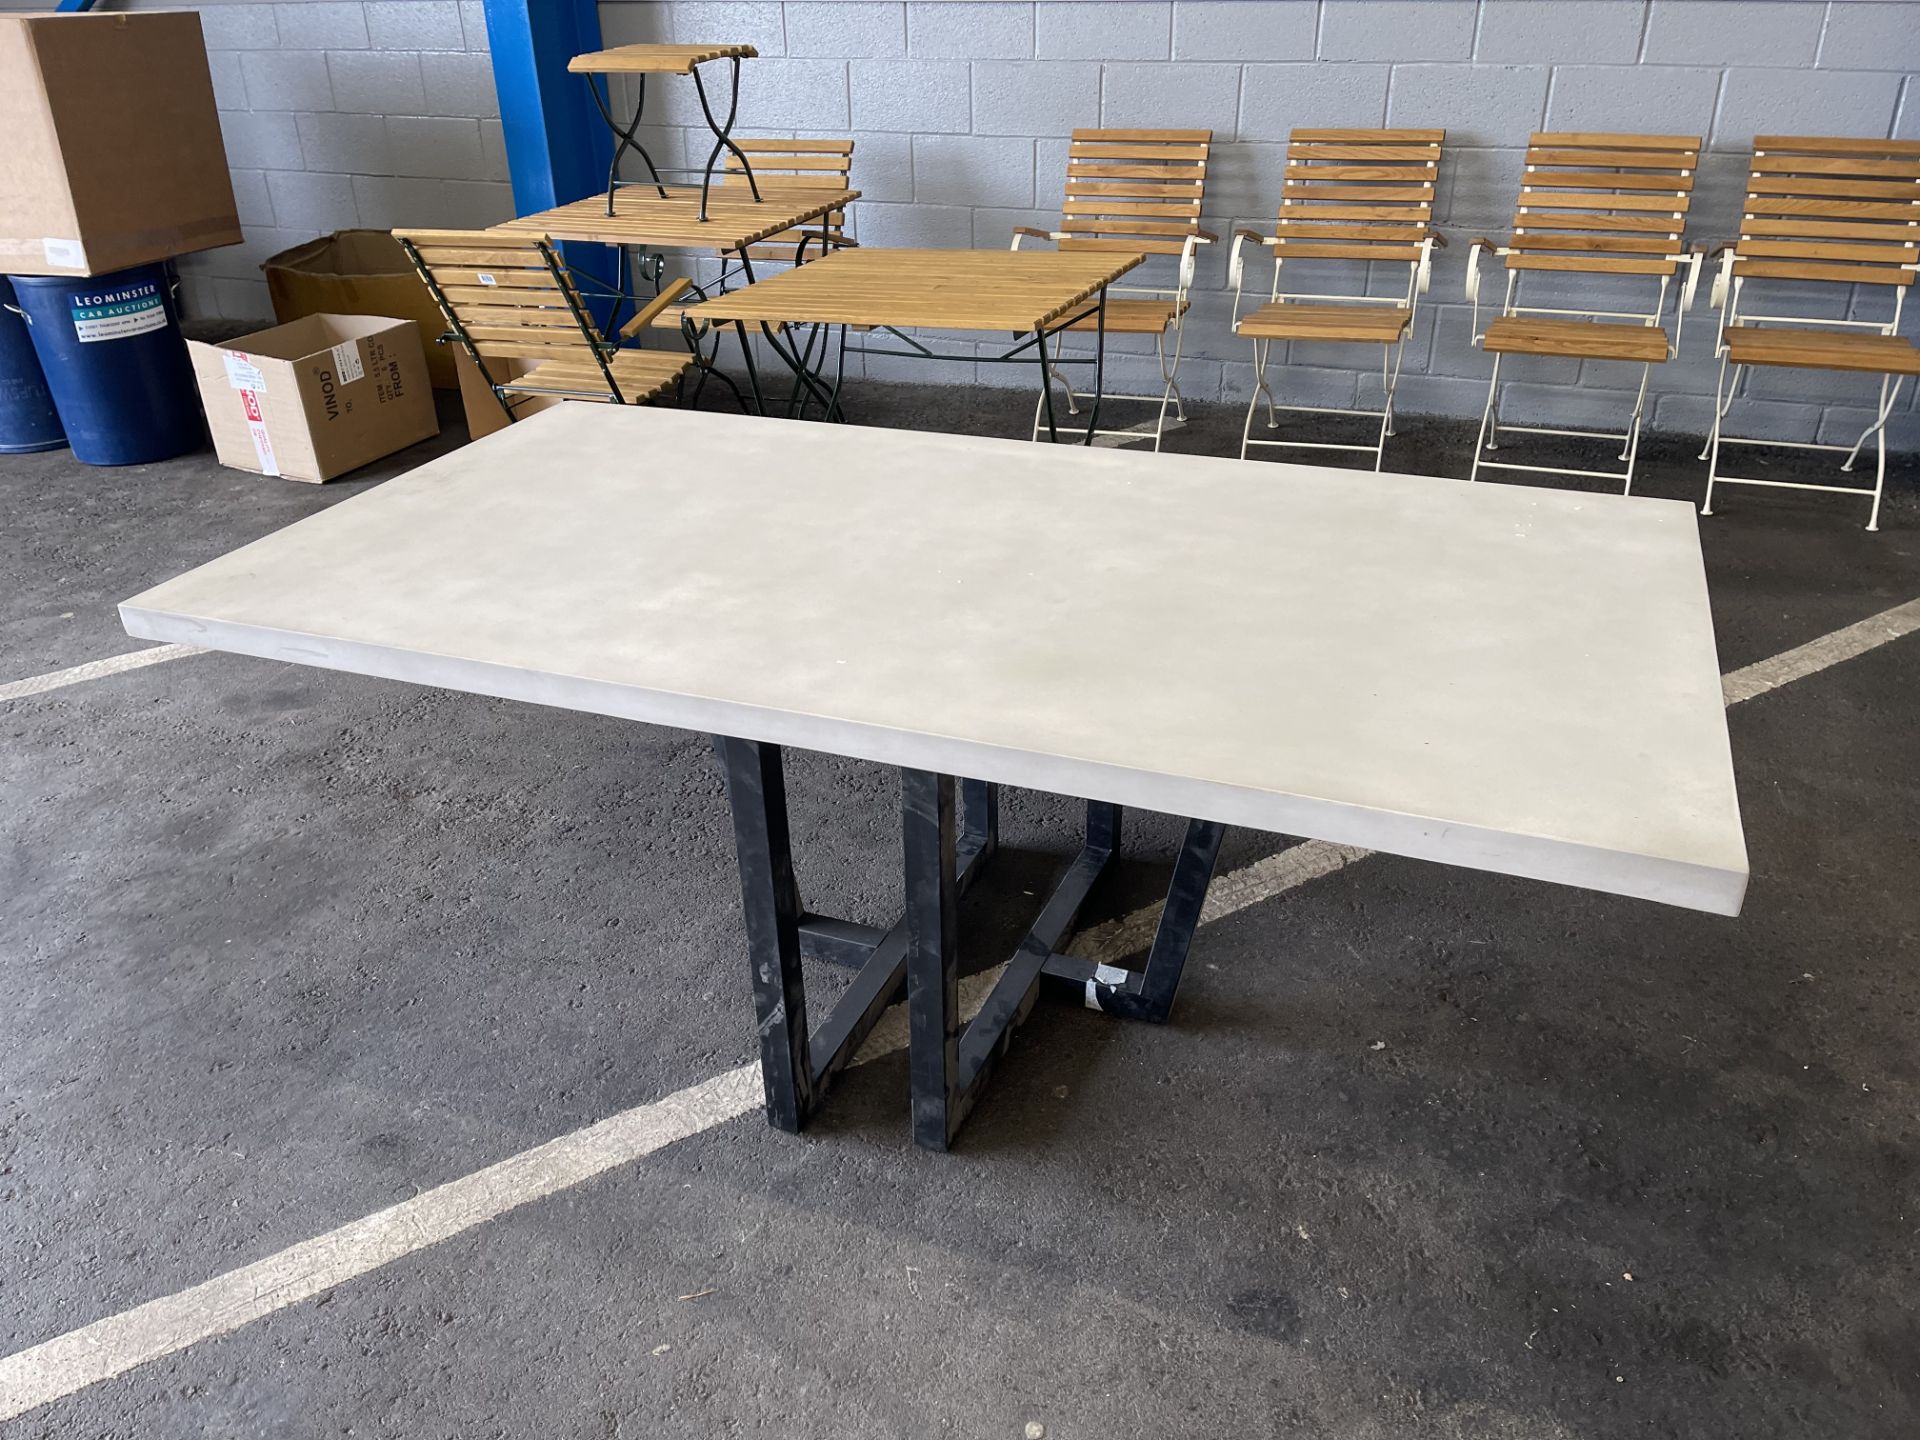 Dunelm Concrete Dining Table 190 x 100cm - RRP £550 (All Boxed But Table Tops May Be Have Marks)